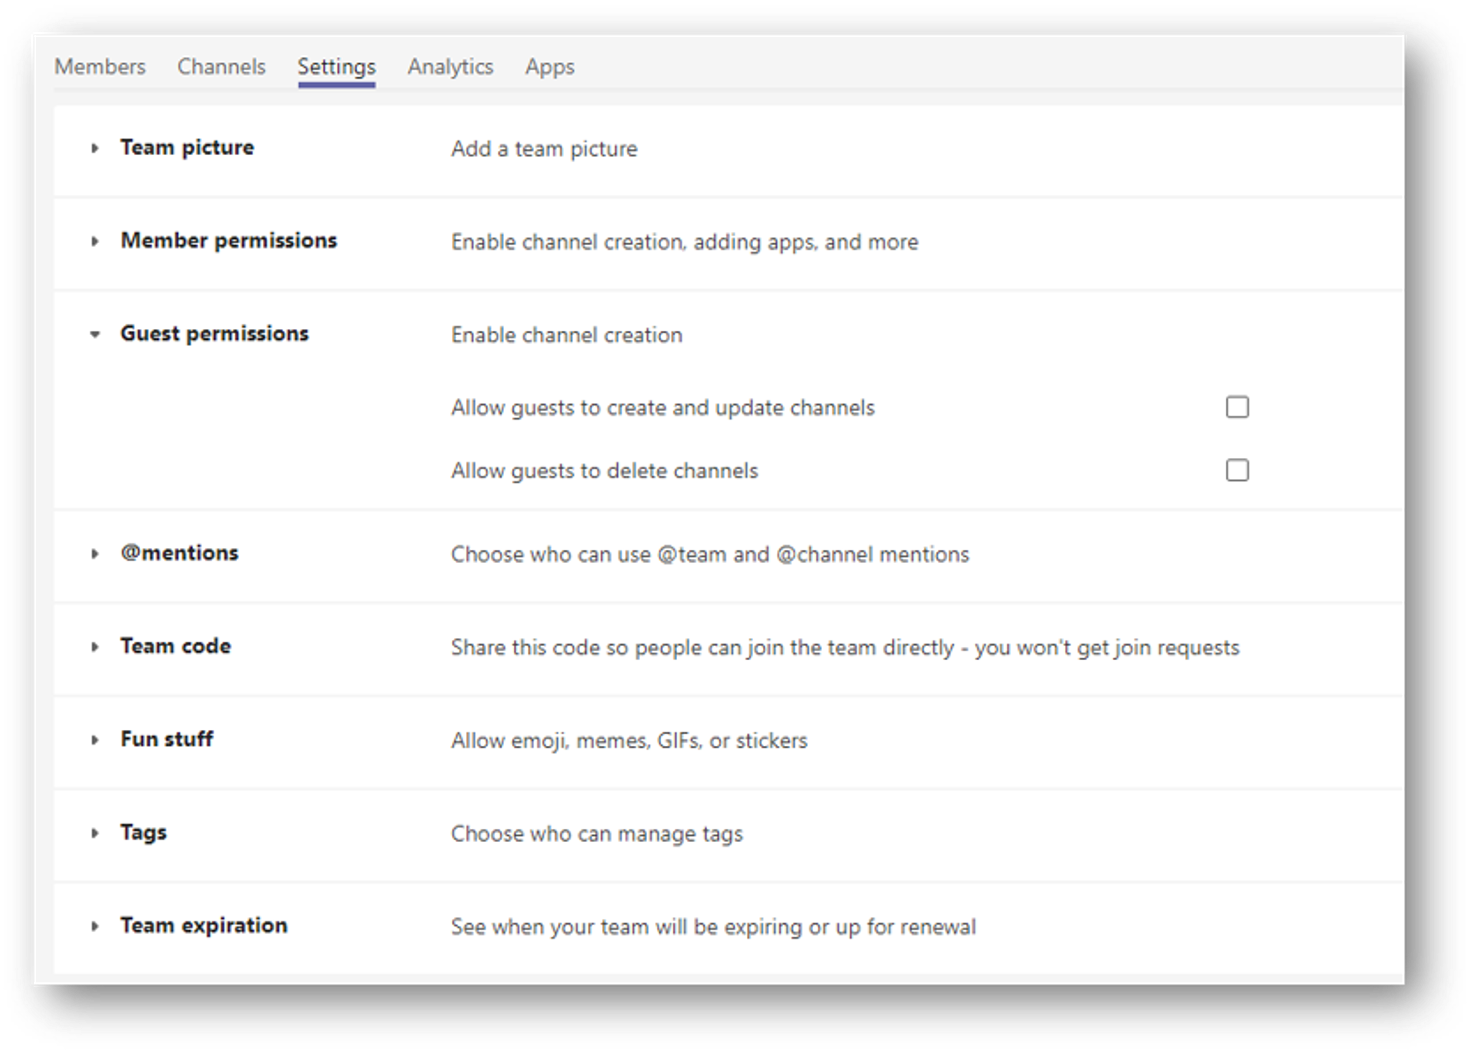 Screenshot showing a team's settings in the Microsoft Teams client.